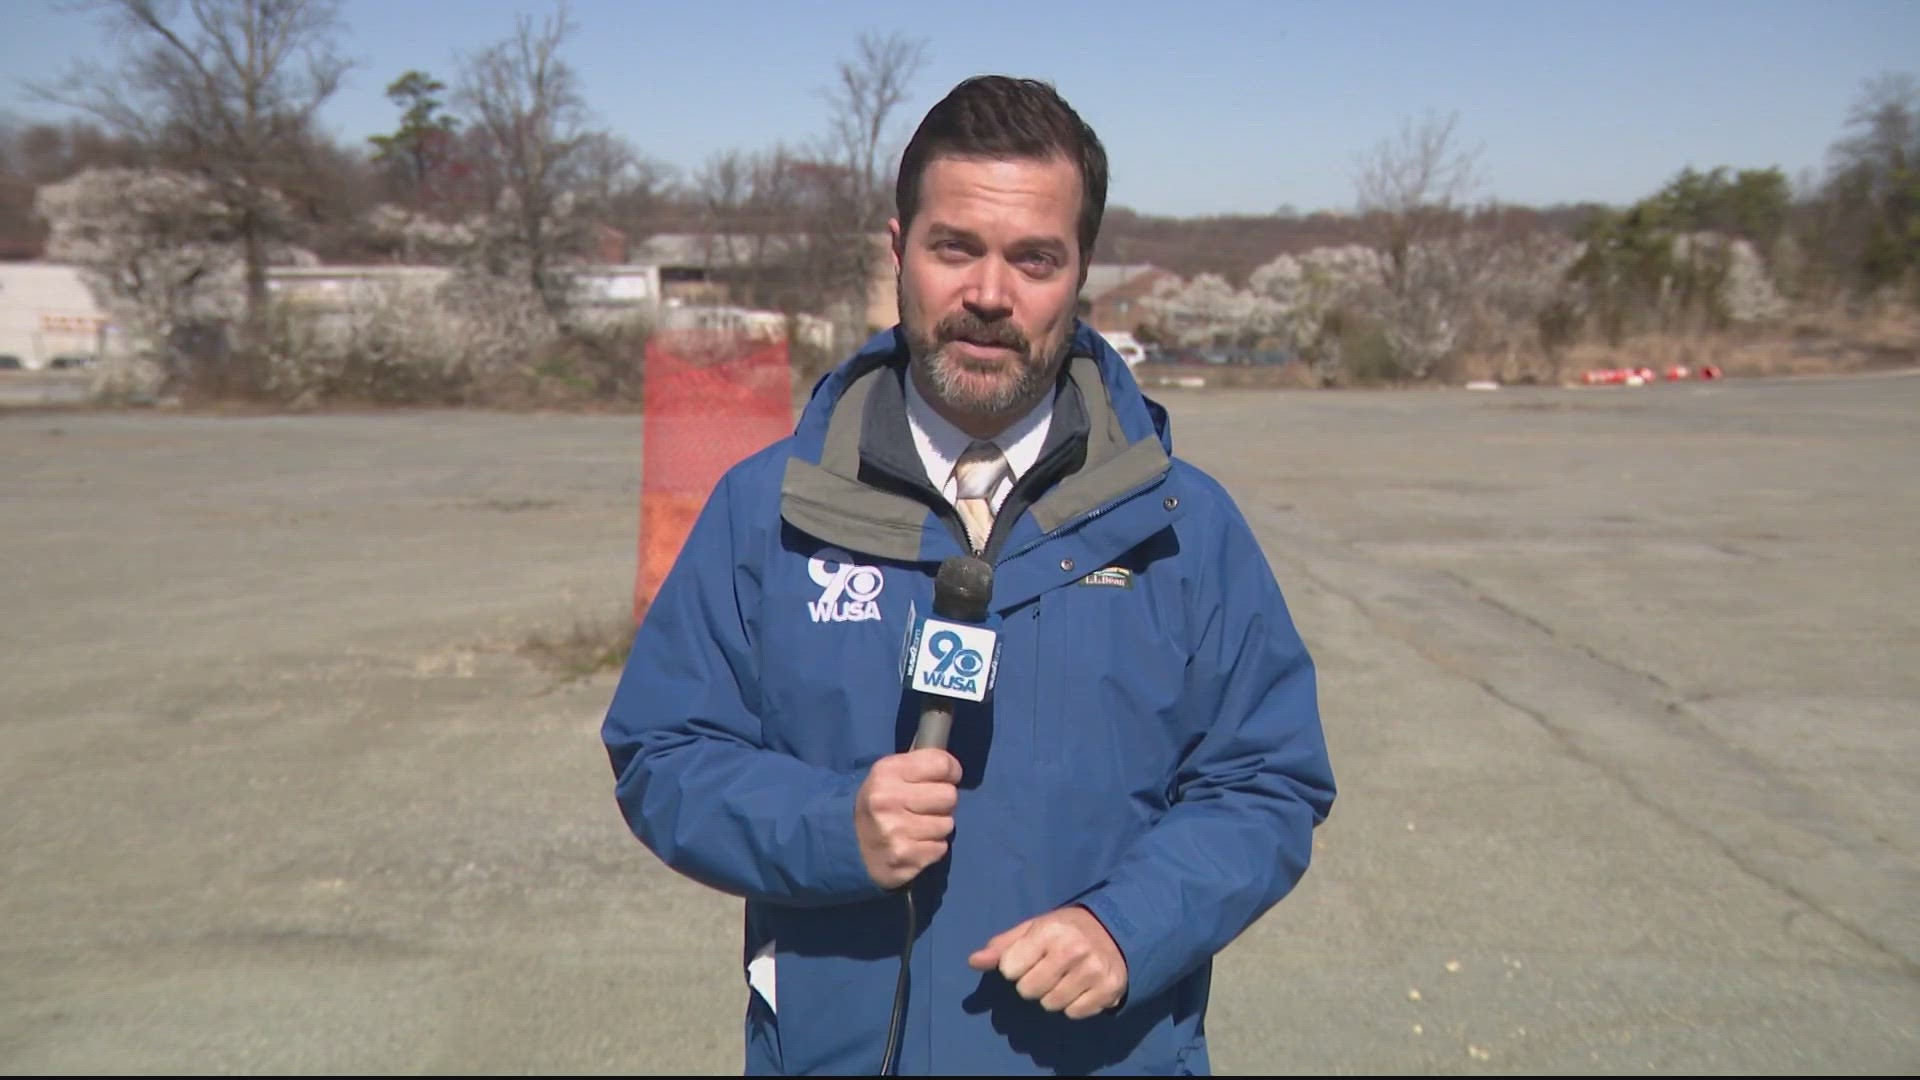 Nathan Baca got reactions to the proposed FBI location in Greenbelt. He joins us from the old Landover Mall -- Maryland's second site under consideration.